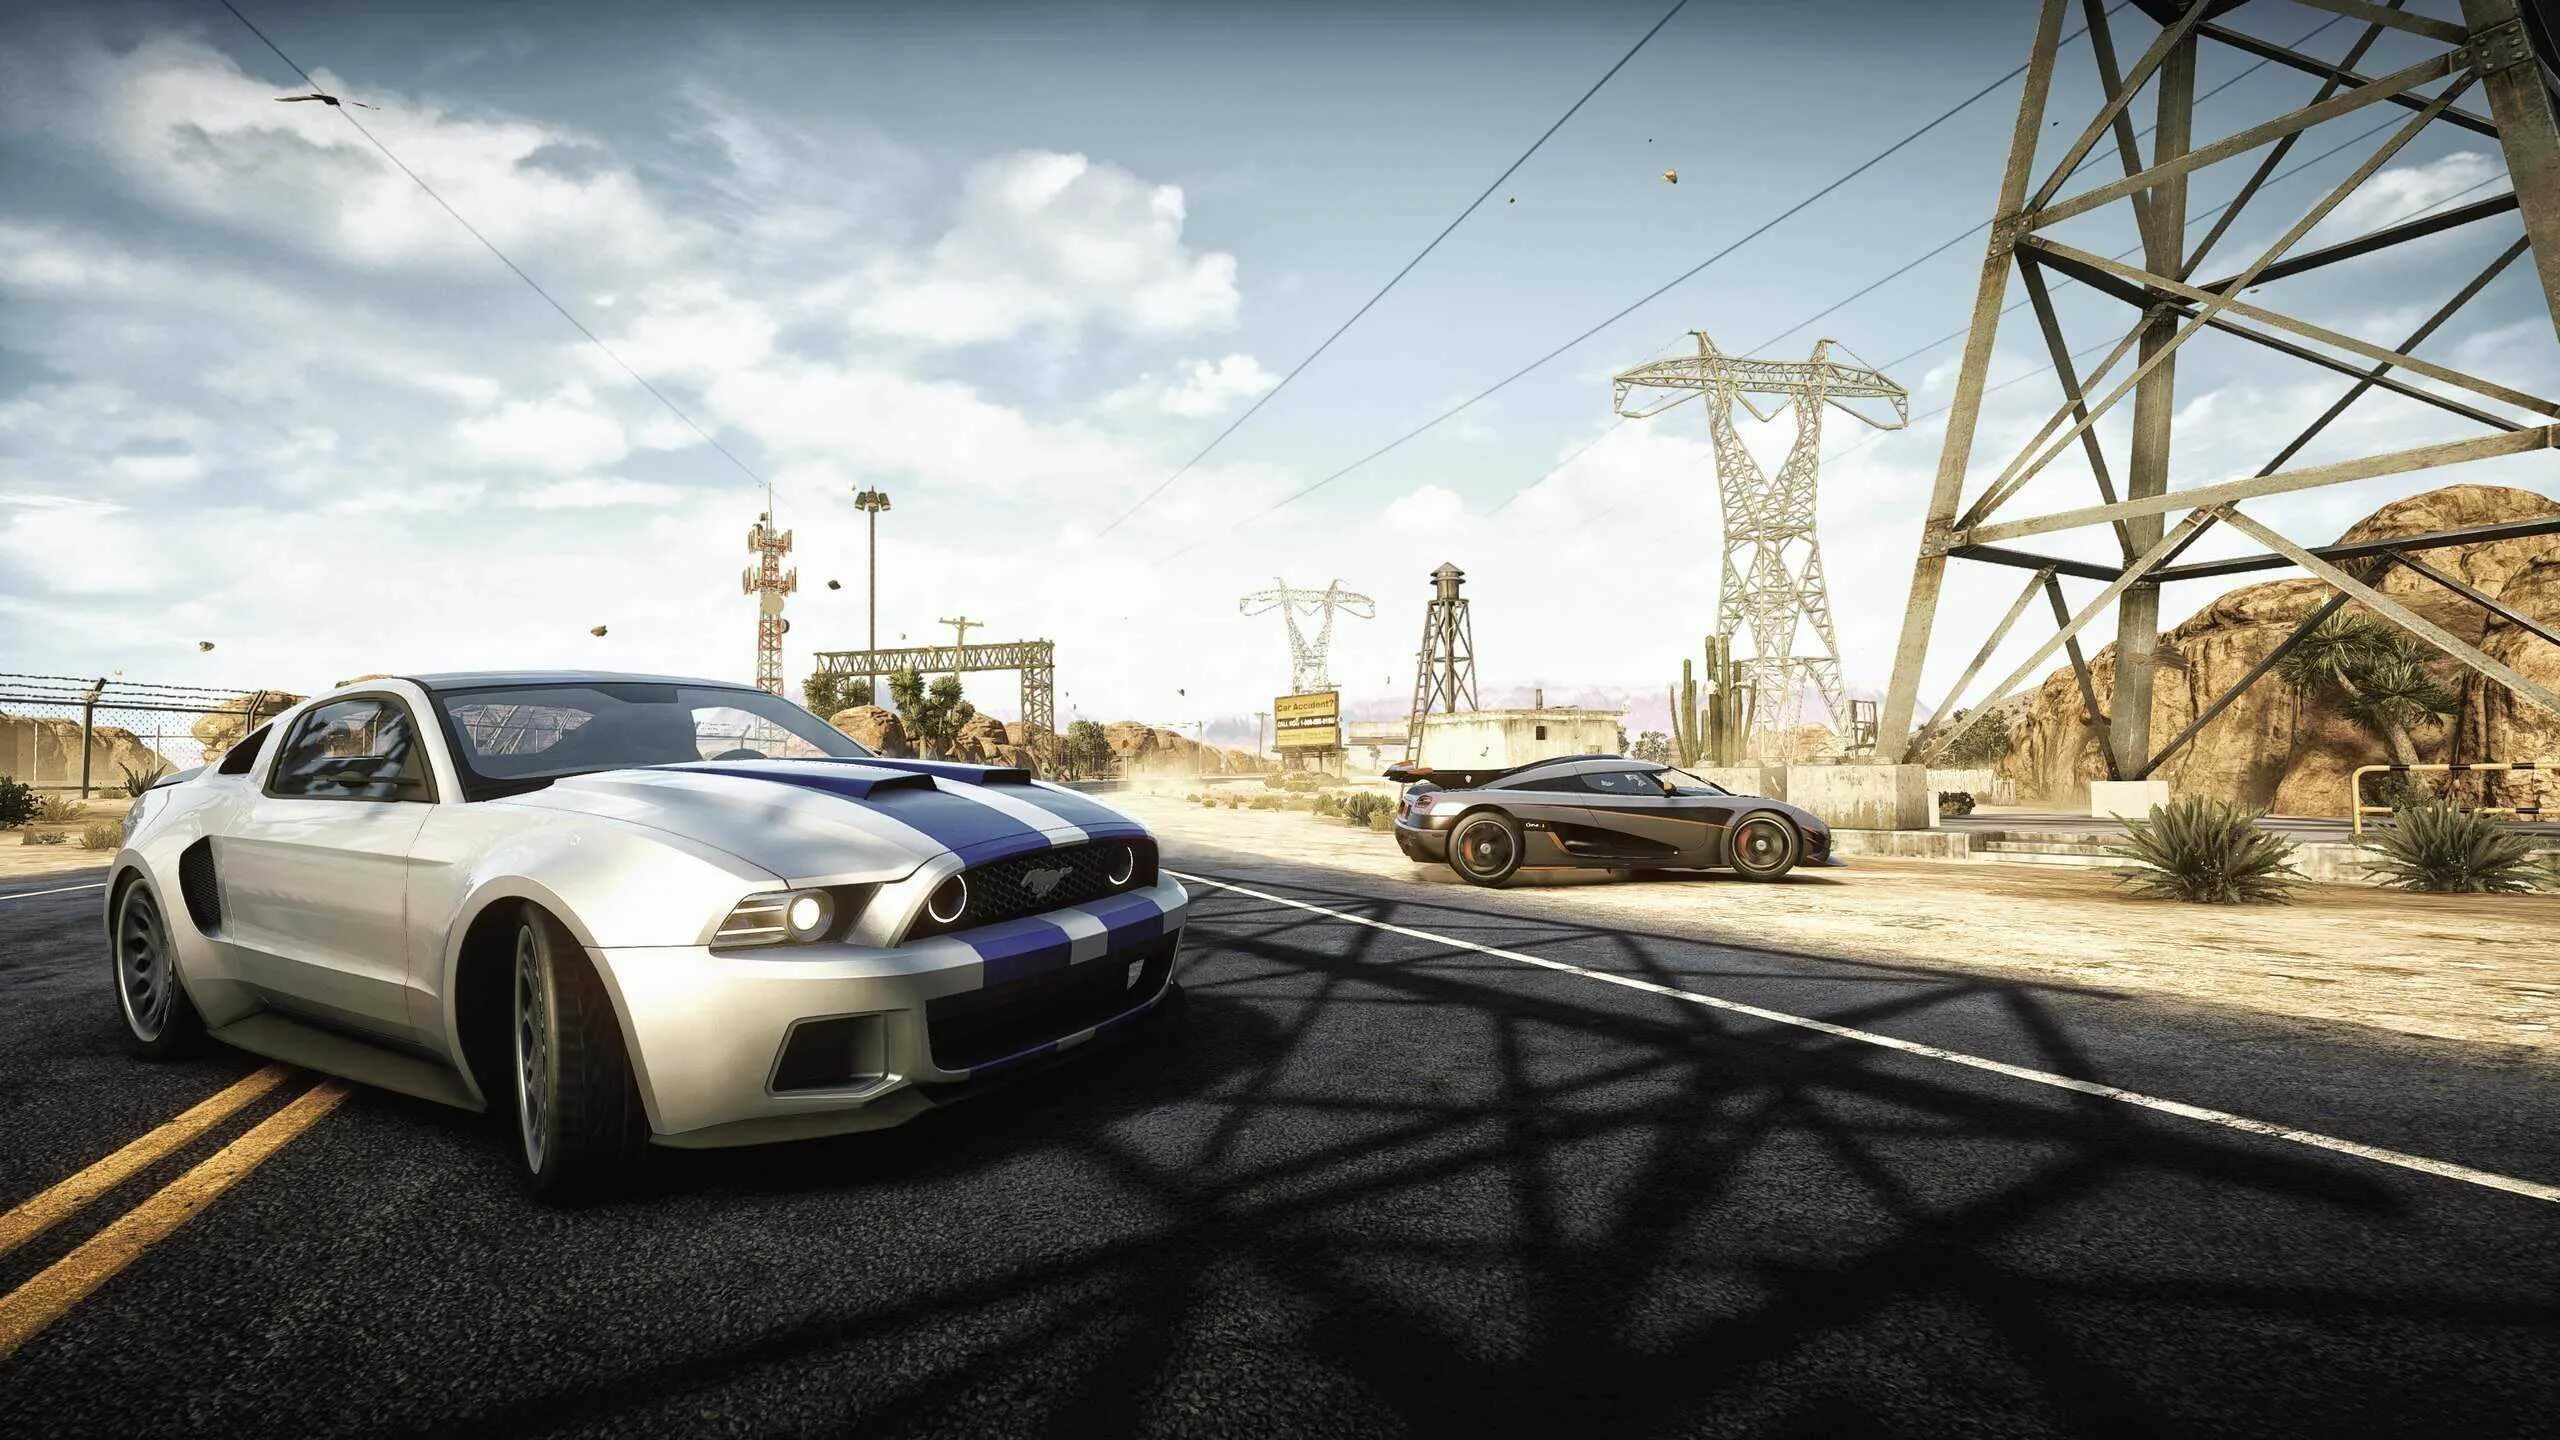 Need download. Нфс мост вантед 2019. NFS most wanted 4к. Нфс мост вантед 2021. NFS most wanted 2015.